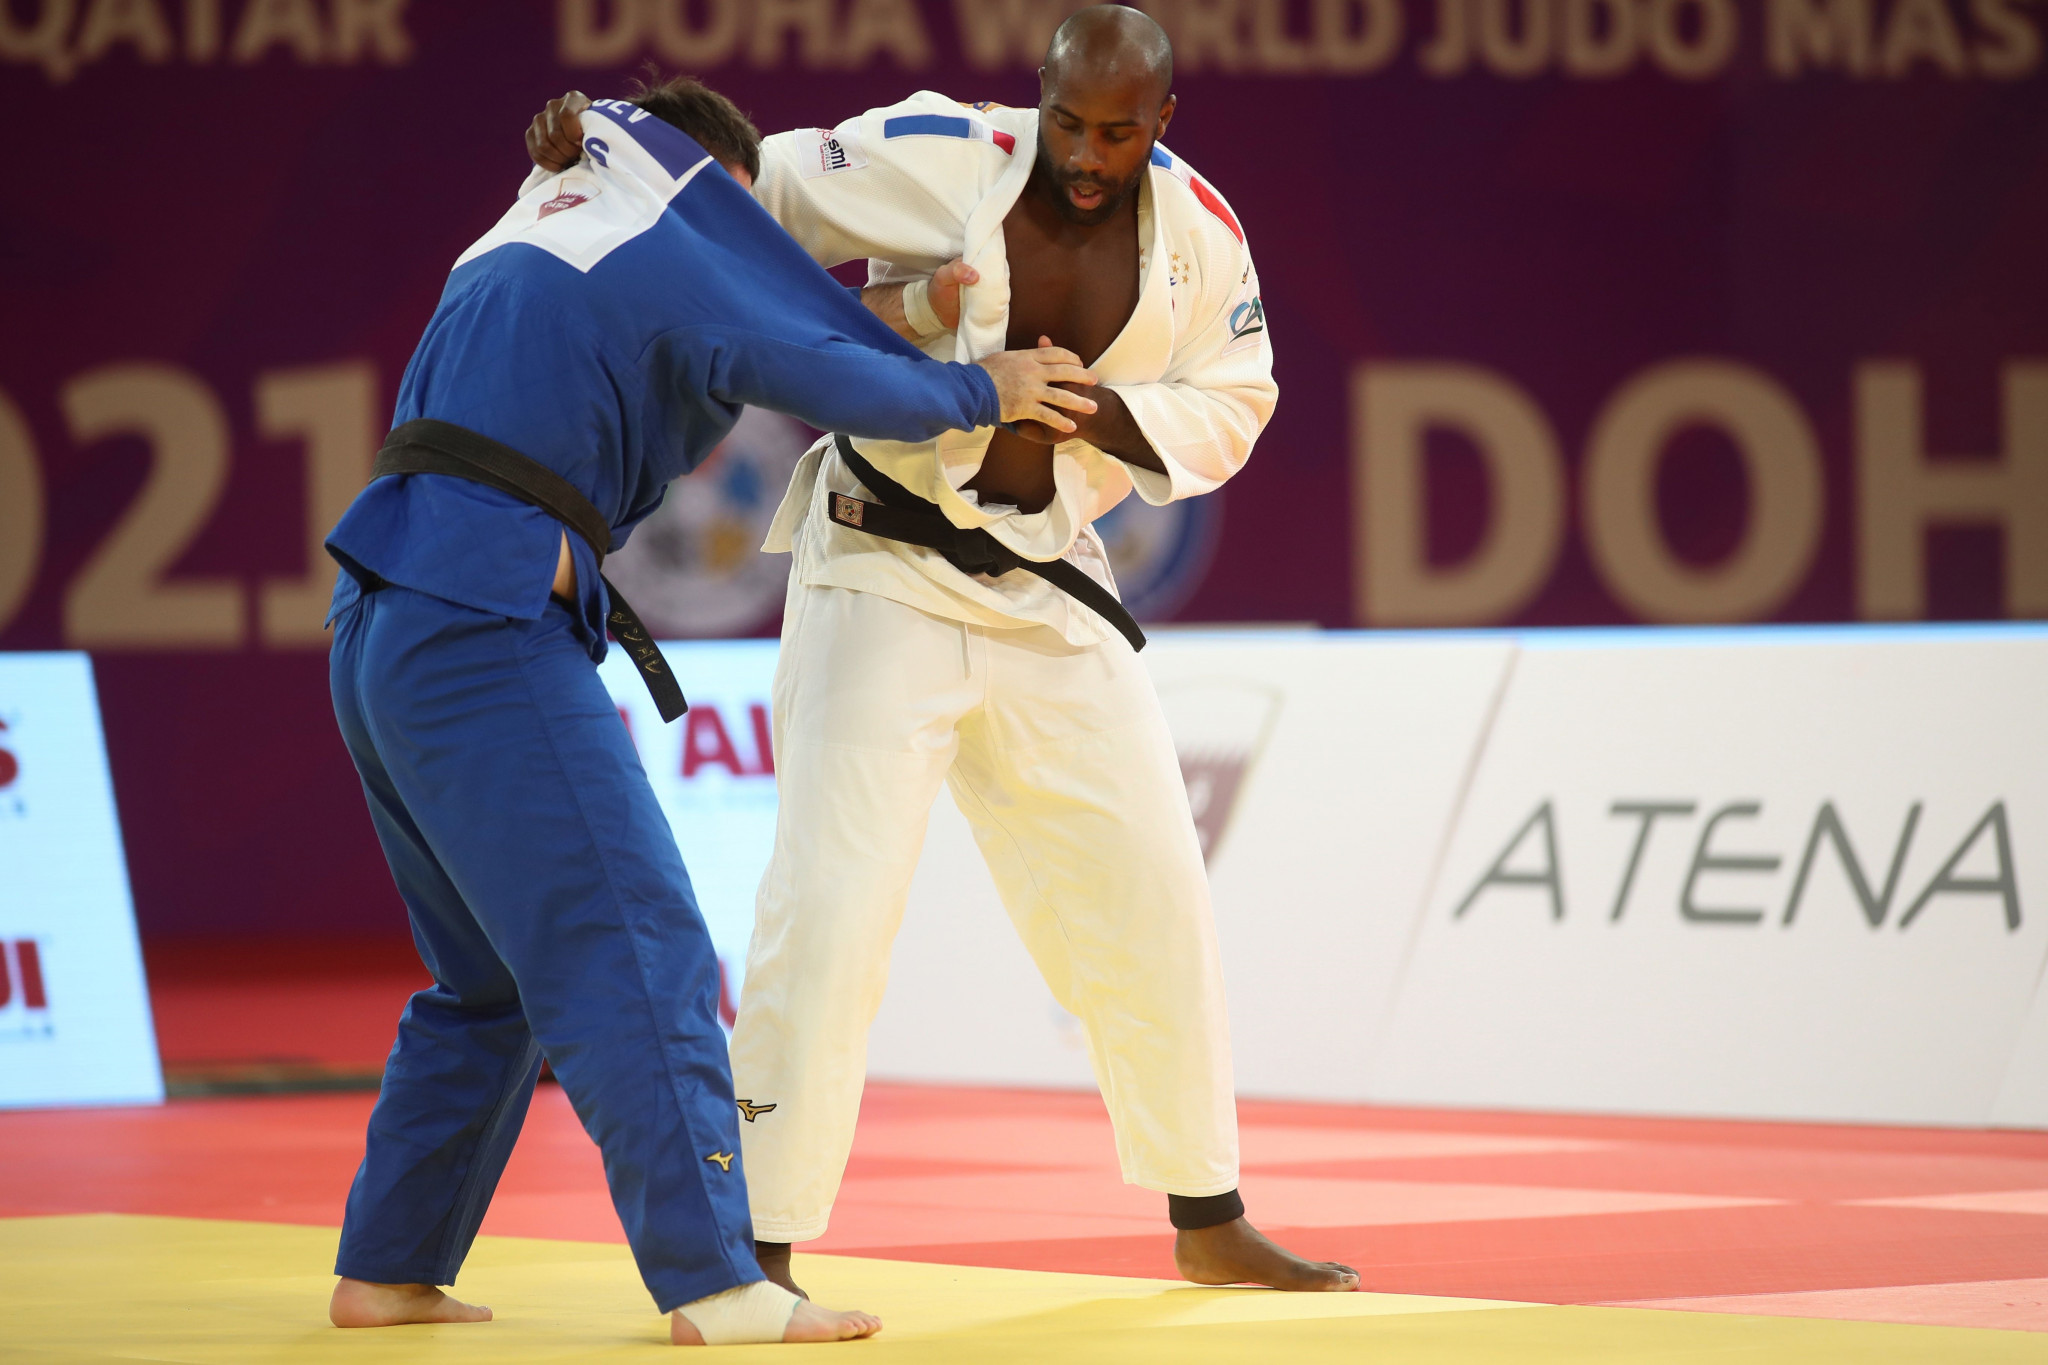 Doha is set to stage the World Judo Championships in five months' time ©Getty Images